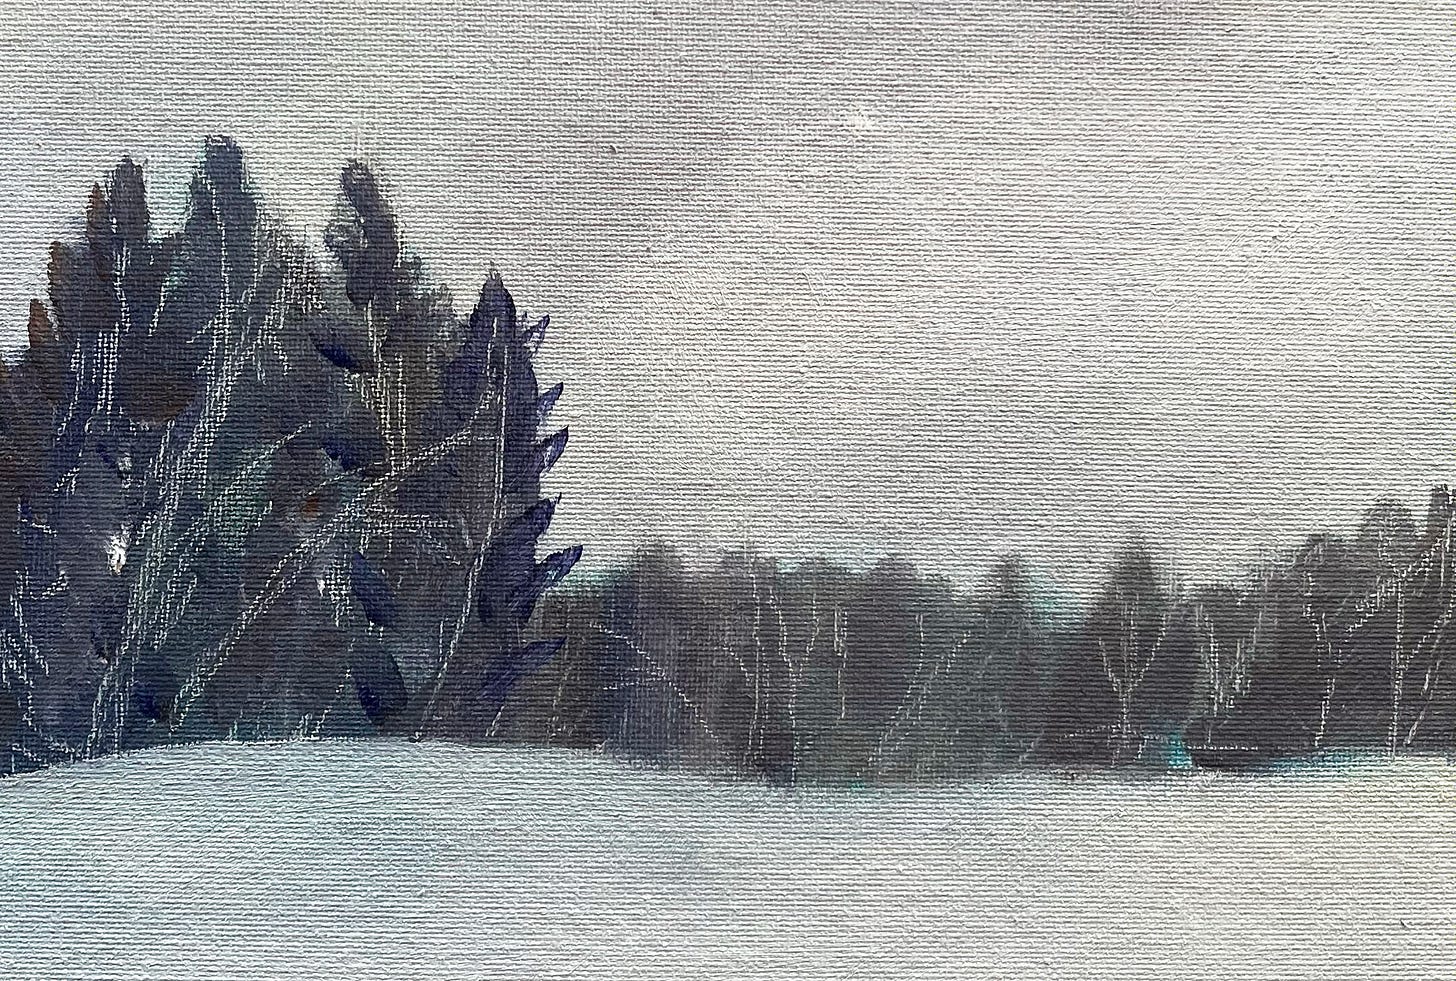 painted winter scene with dark trees on grey snow drifts